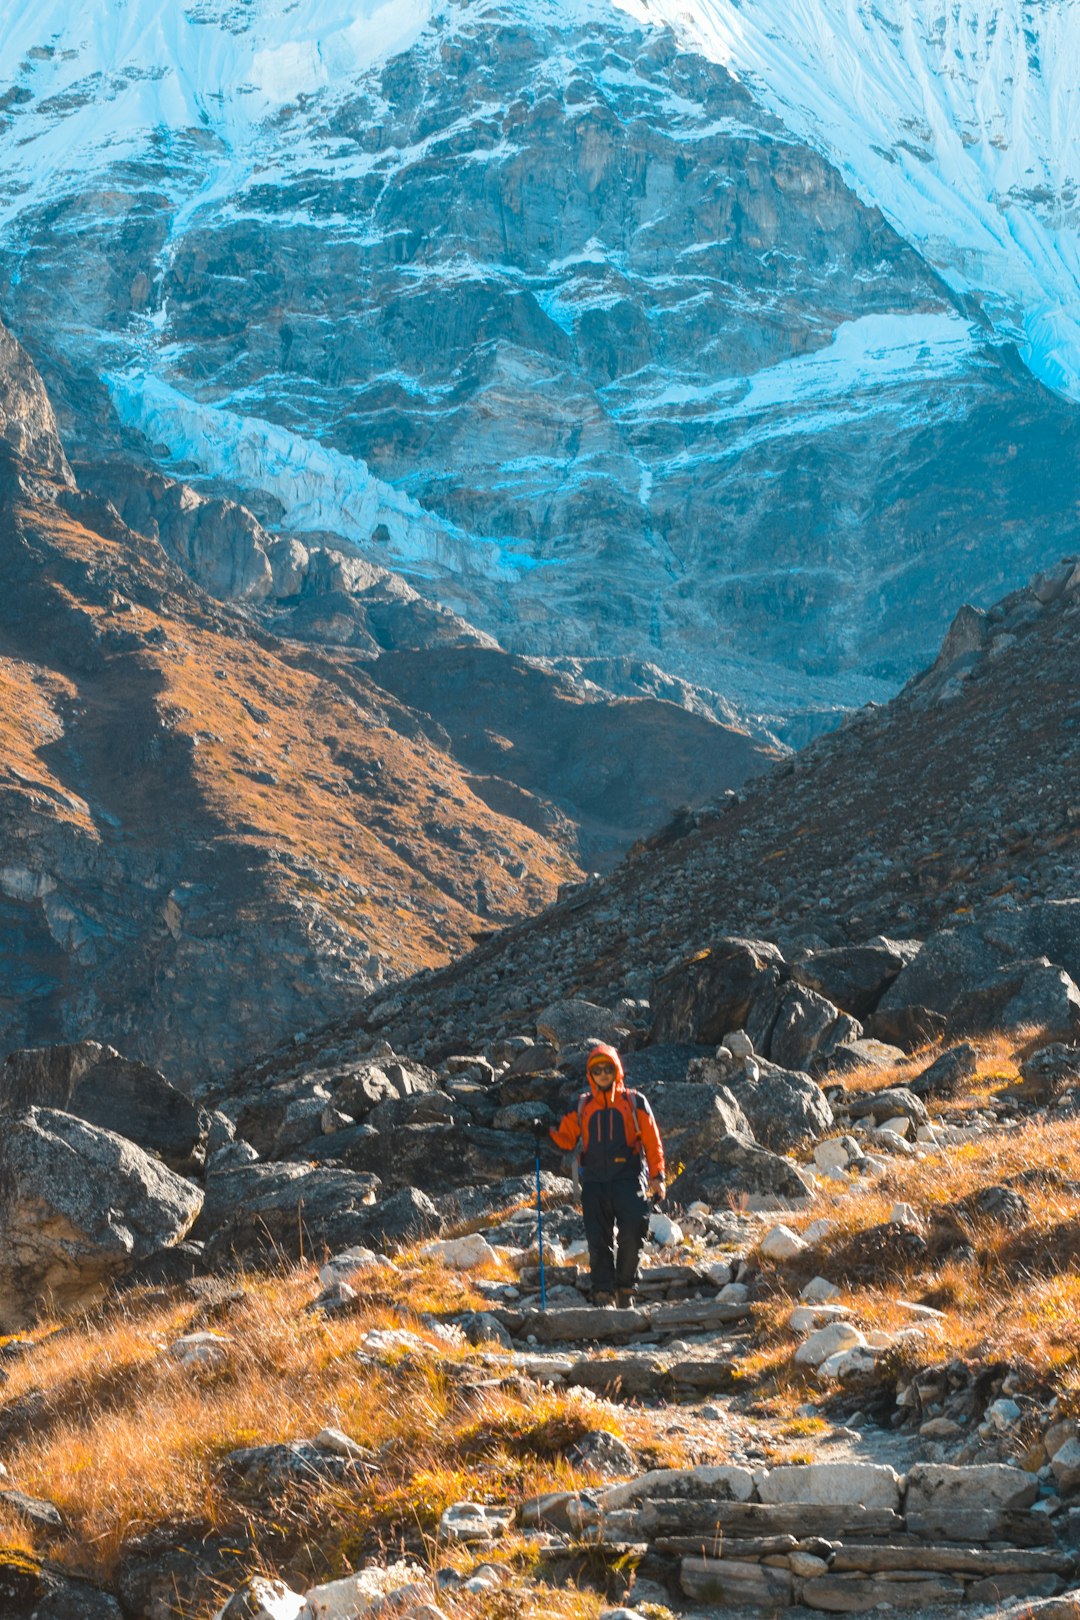 travelers stories about Hill in Tsho Rolpa Glacial Lake, Nepal